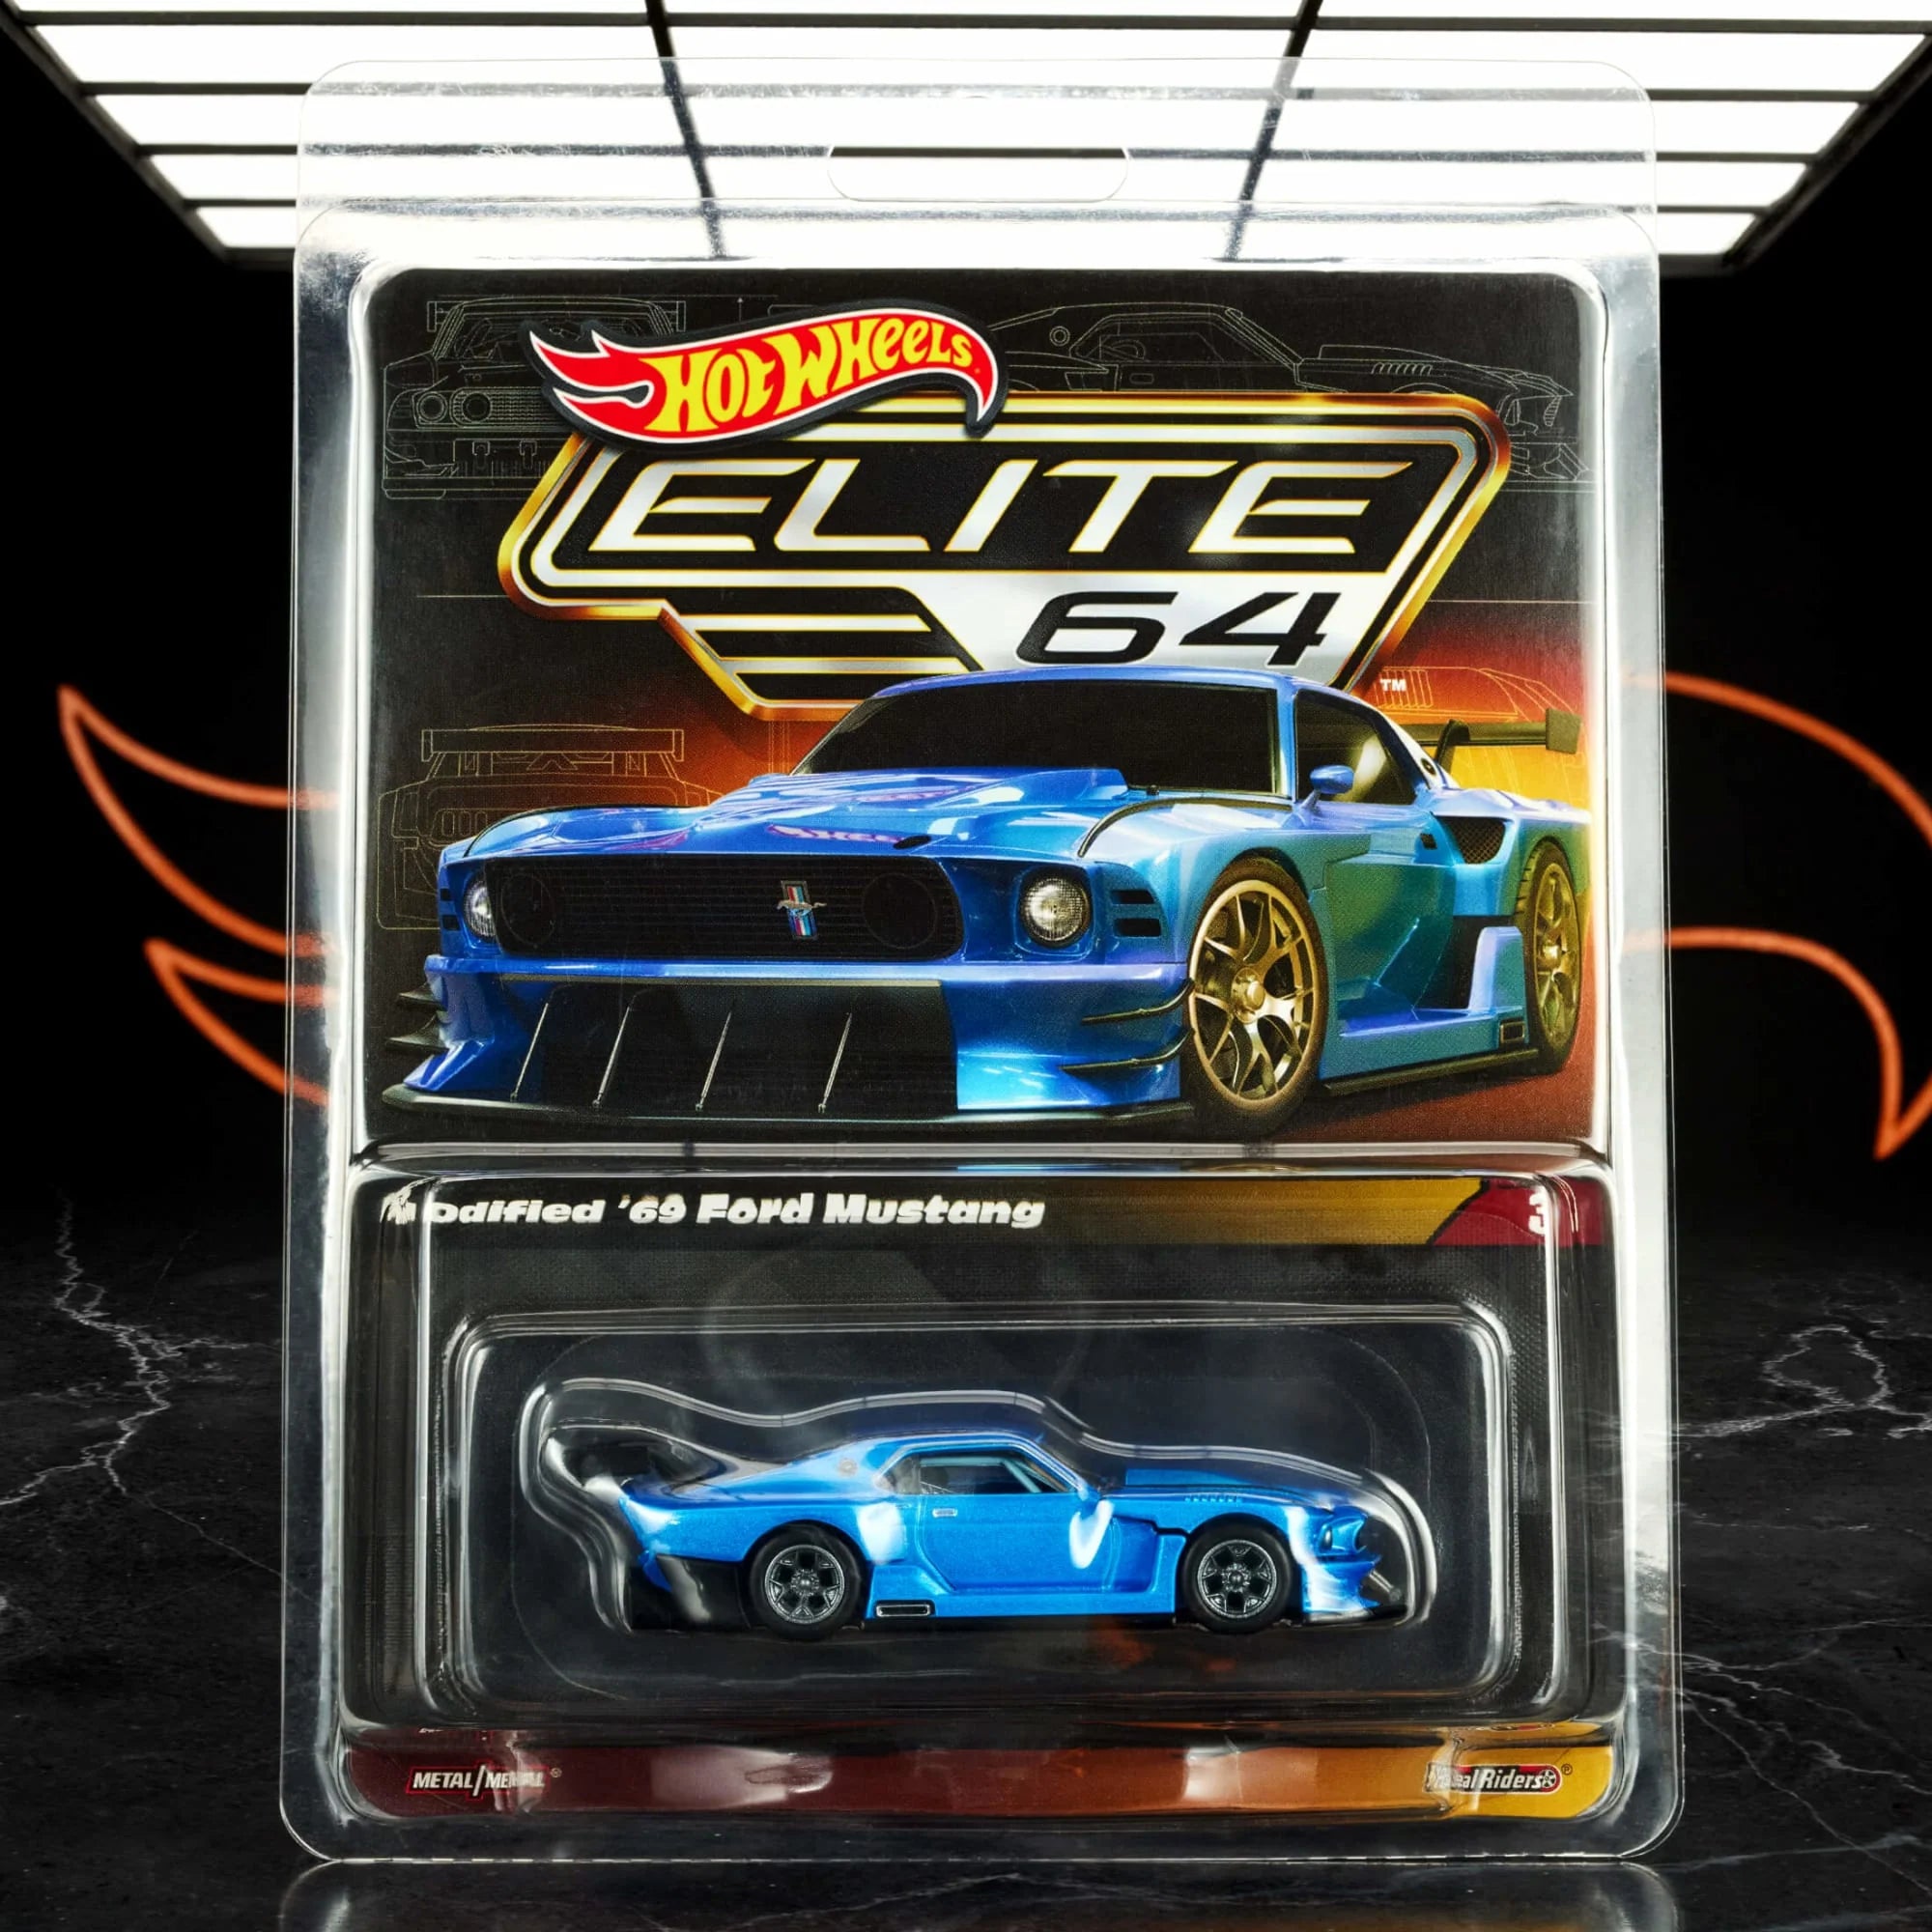 Hot Wheels HWC Elite 64 Series Modified ’69 Ford Mustang